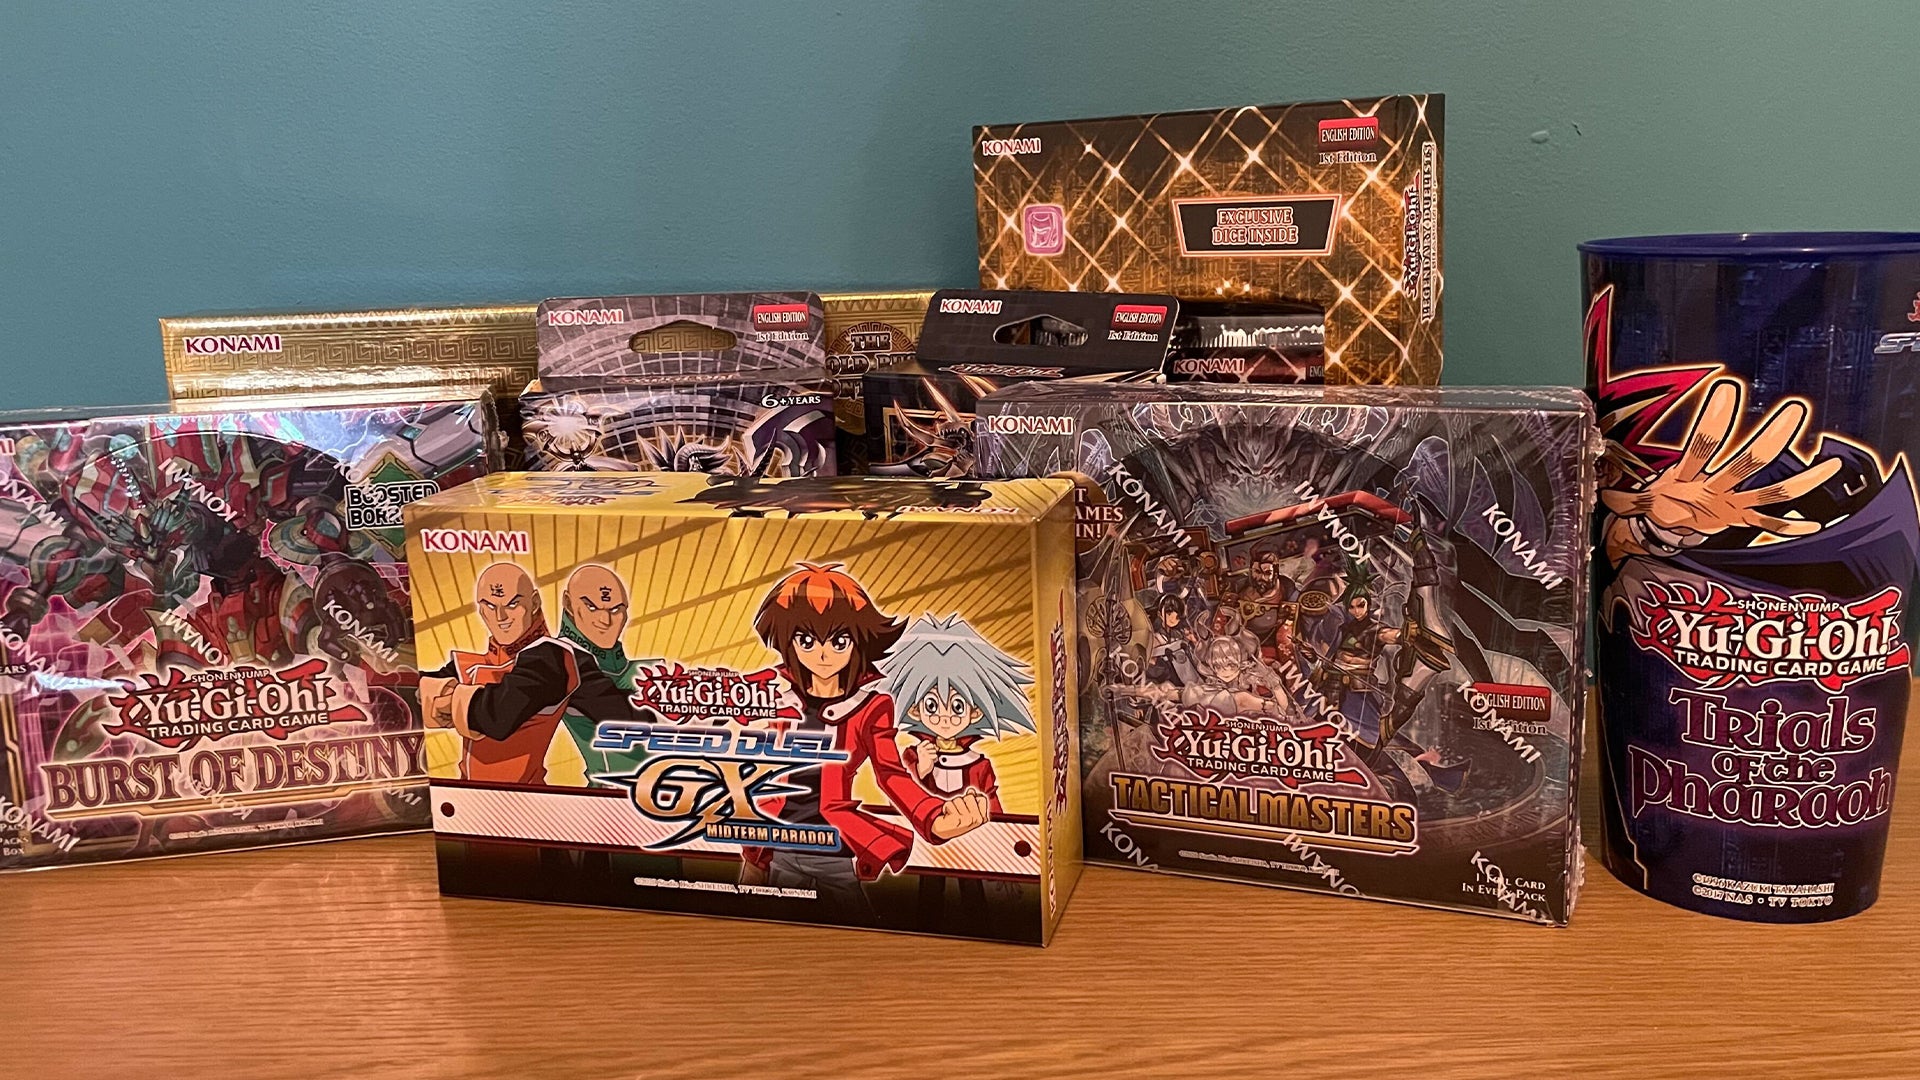 Image for Yu-Gi-Oh! fans, here’s your chance to win over £230 of cards and prizes for the TCG!